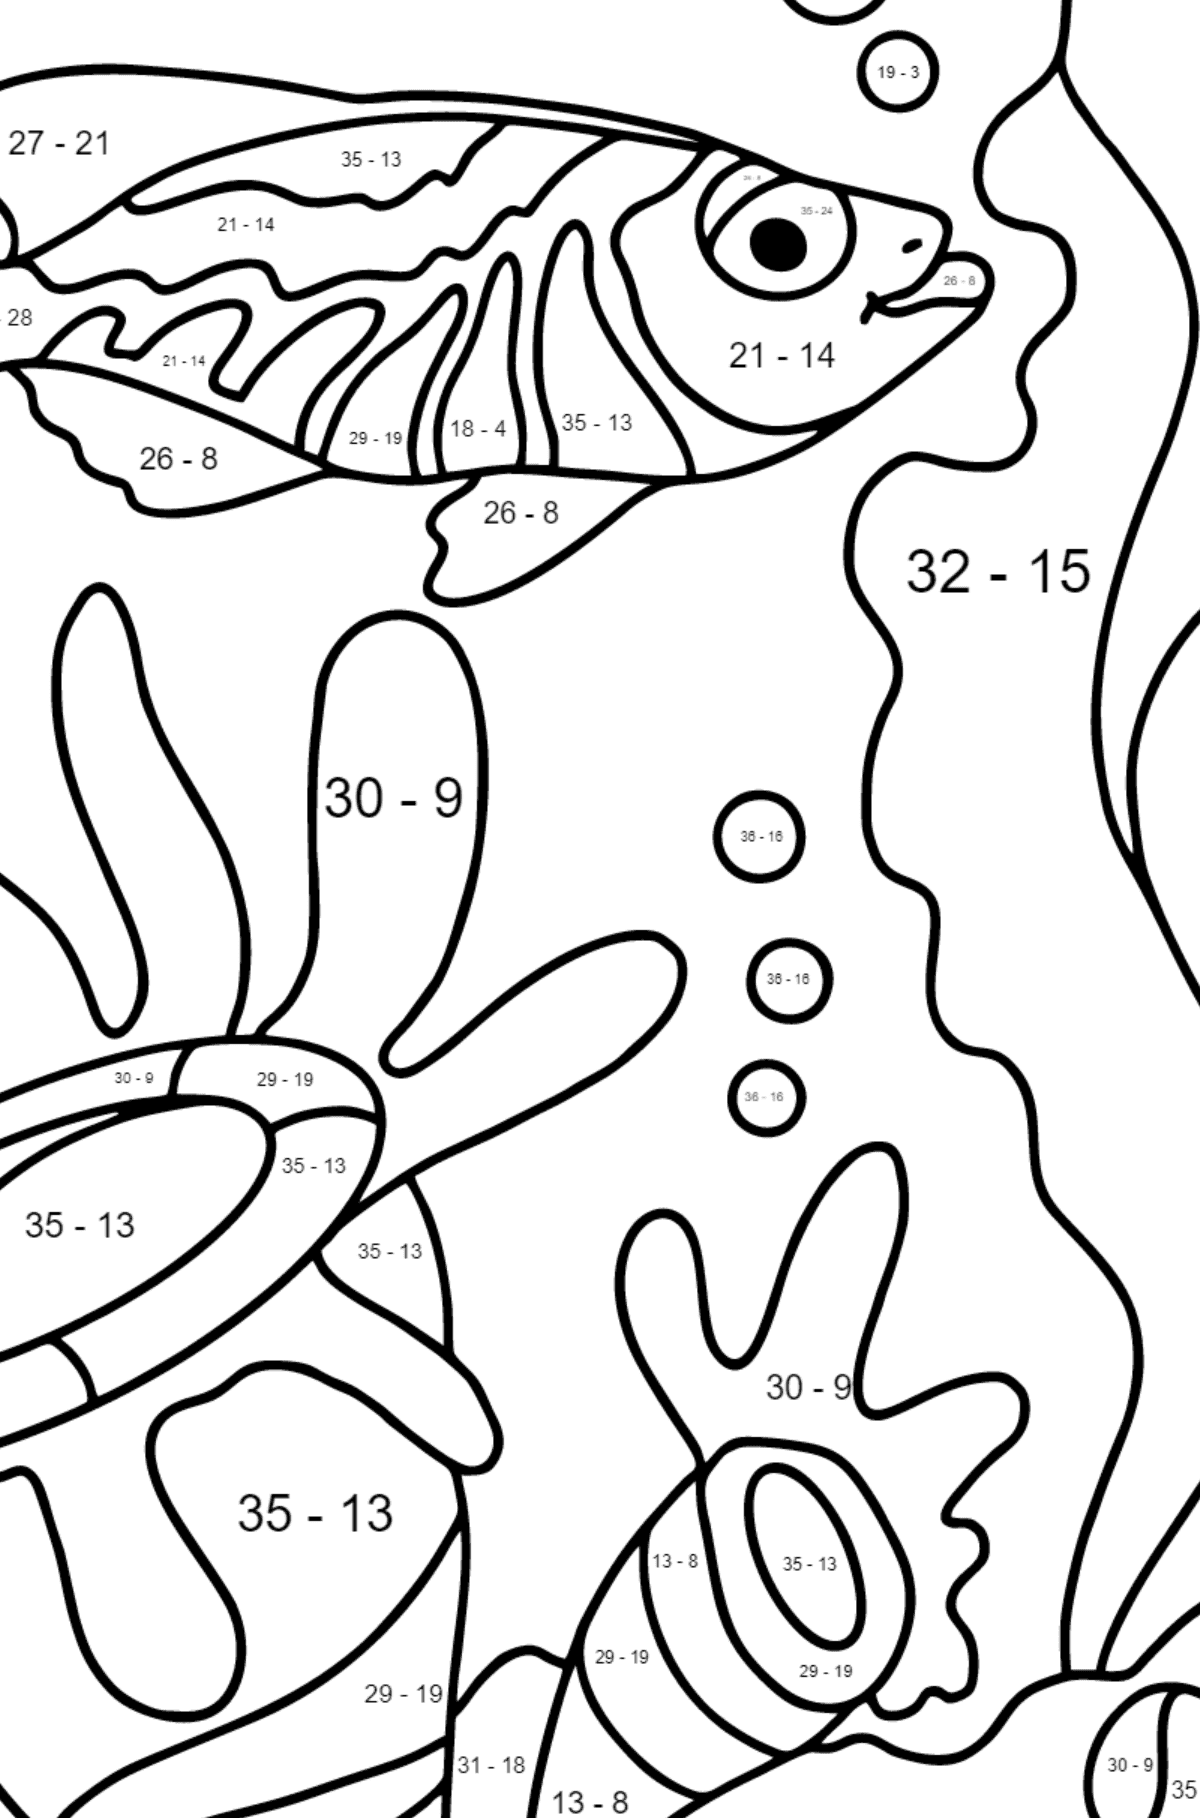 Coloring Page - A Fish is Swimming past the Corals - Math Coloring - Subtraction for Children